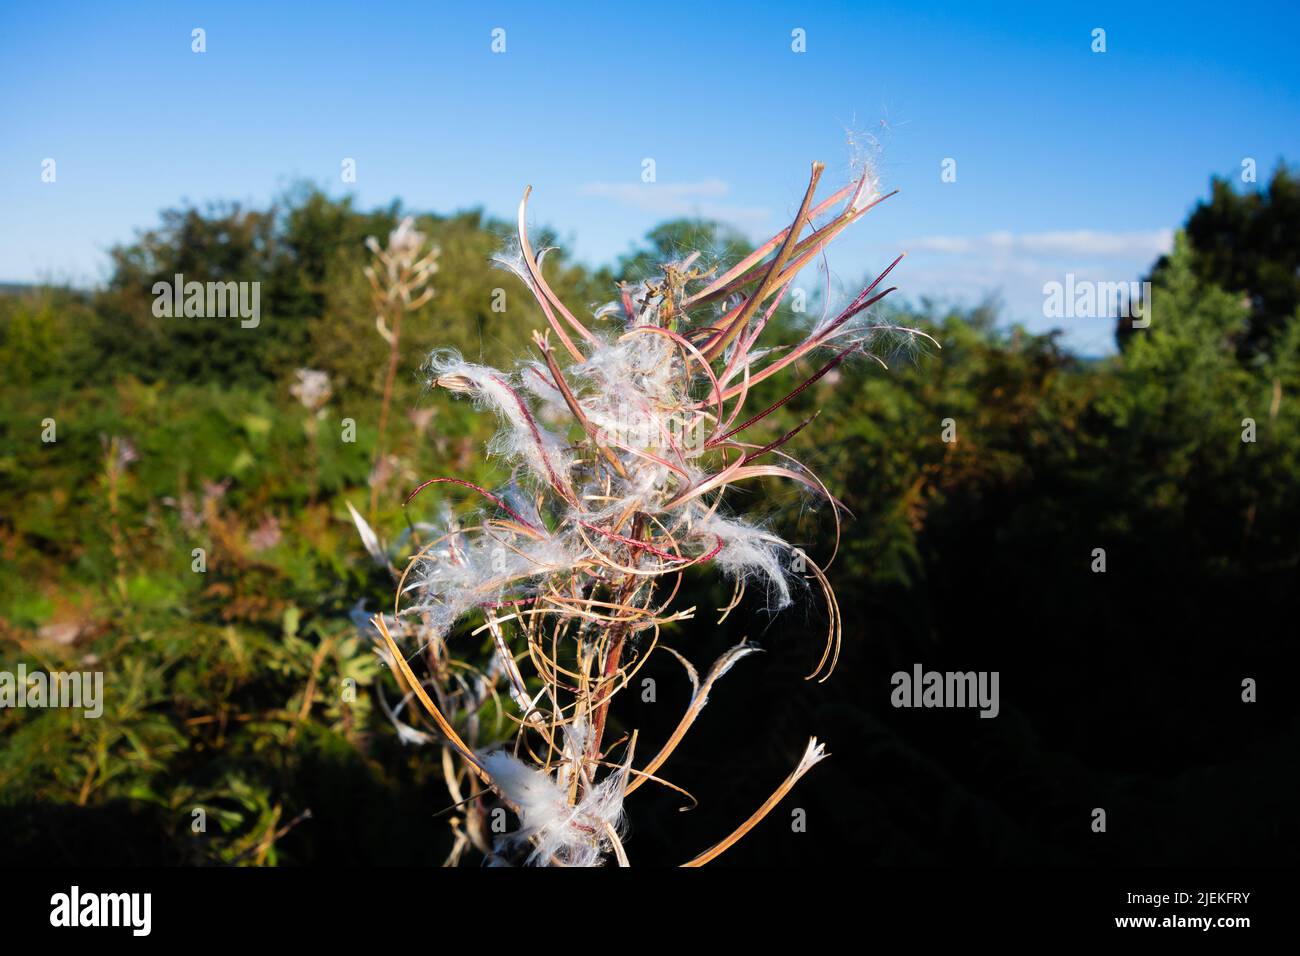 rosebay willowherb seed head with green trees and clear blue sky in the background Stock Photo